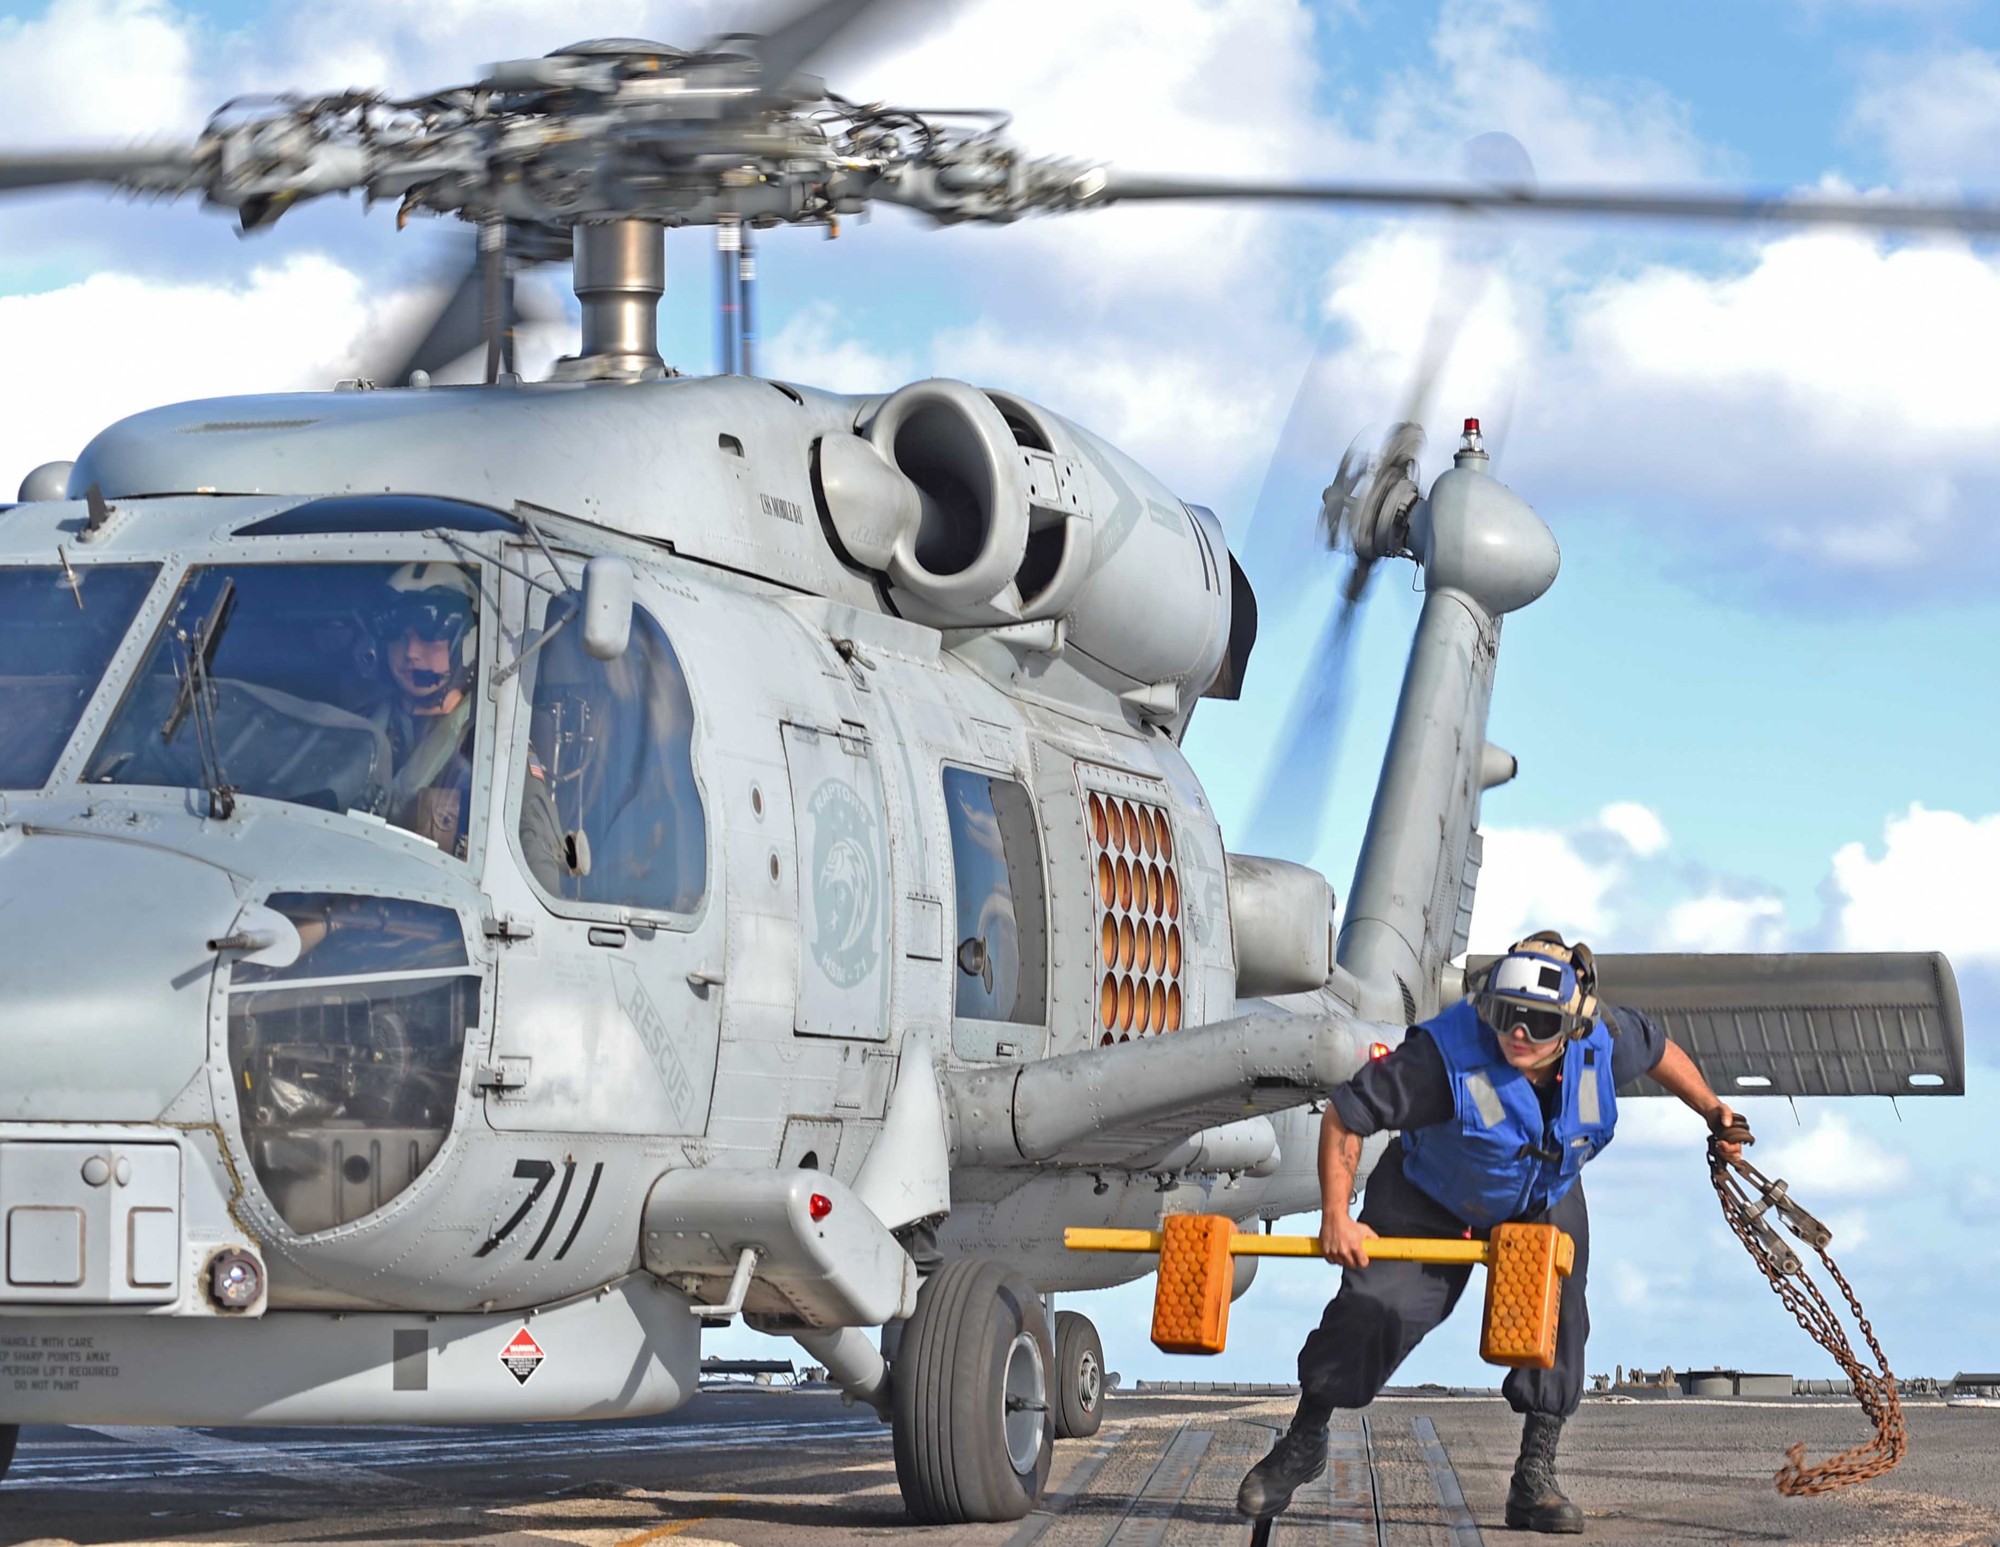 hsm-71 raptors helicopter maritime strike squadron mh-60r seahawk navy 2015 12